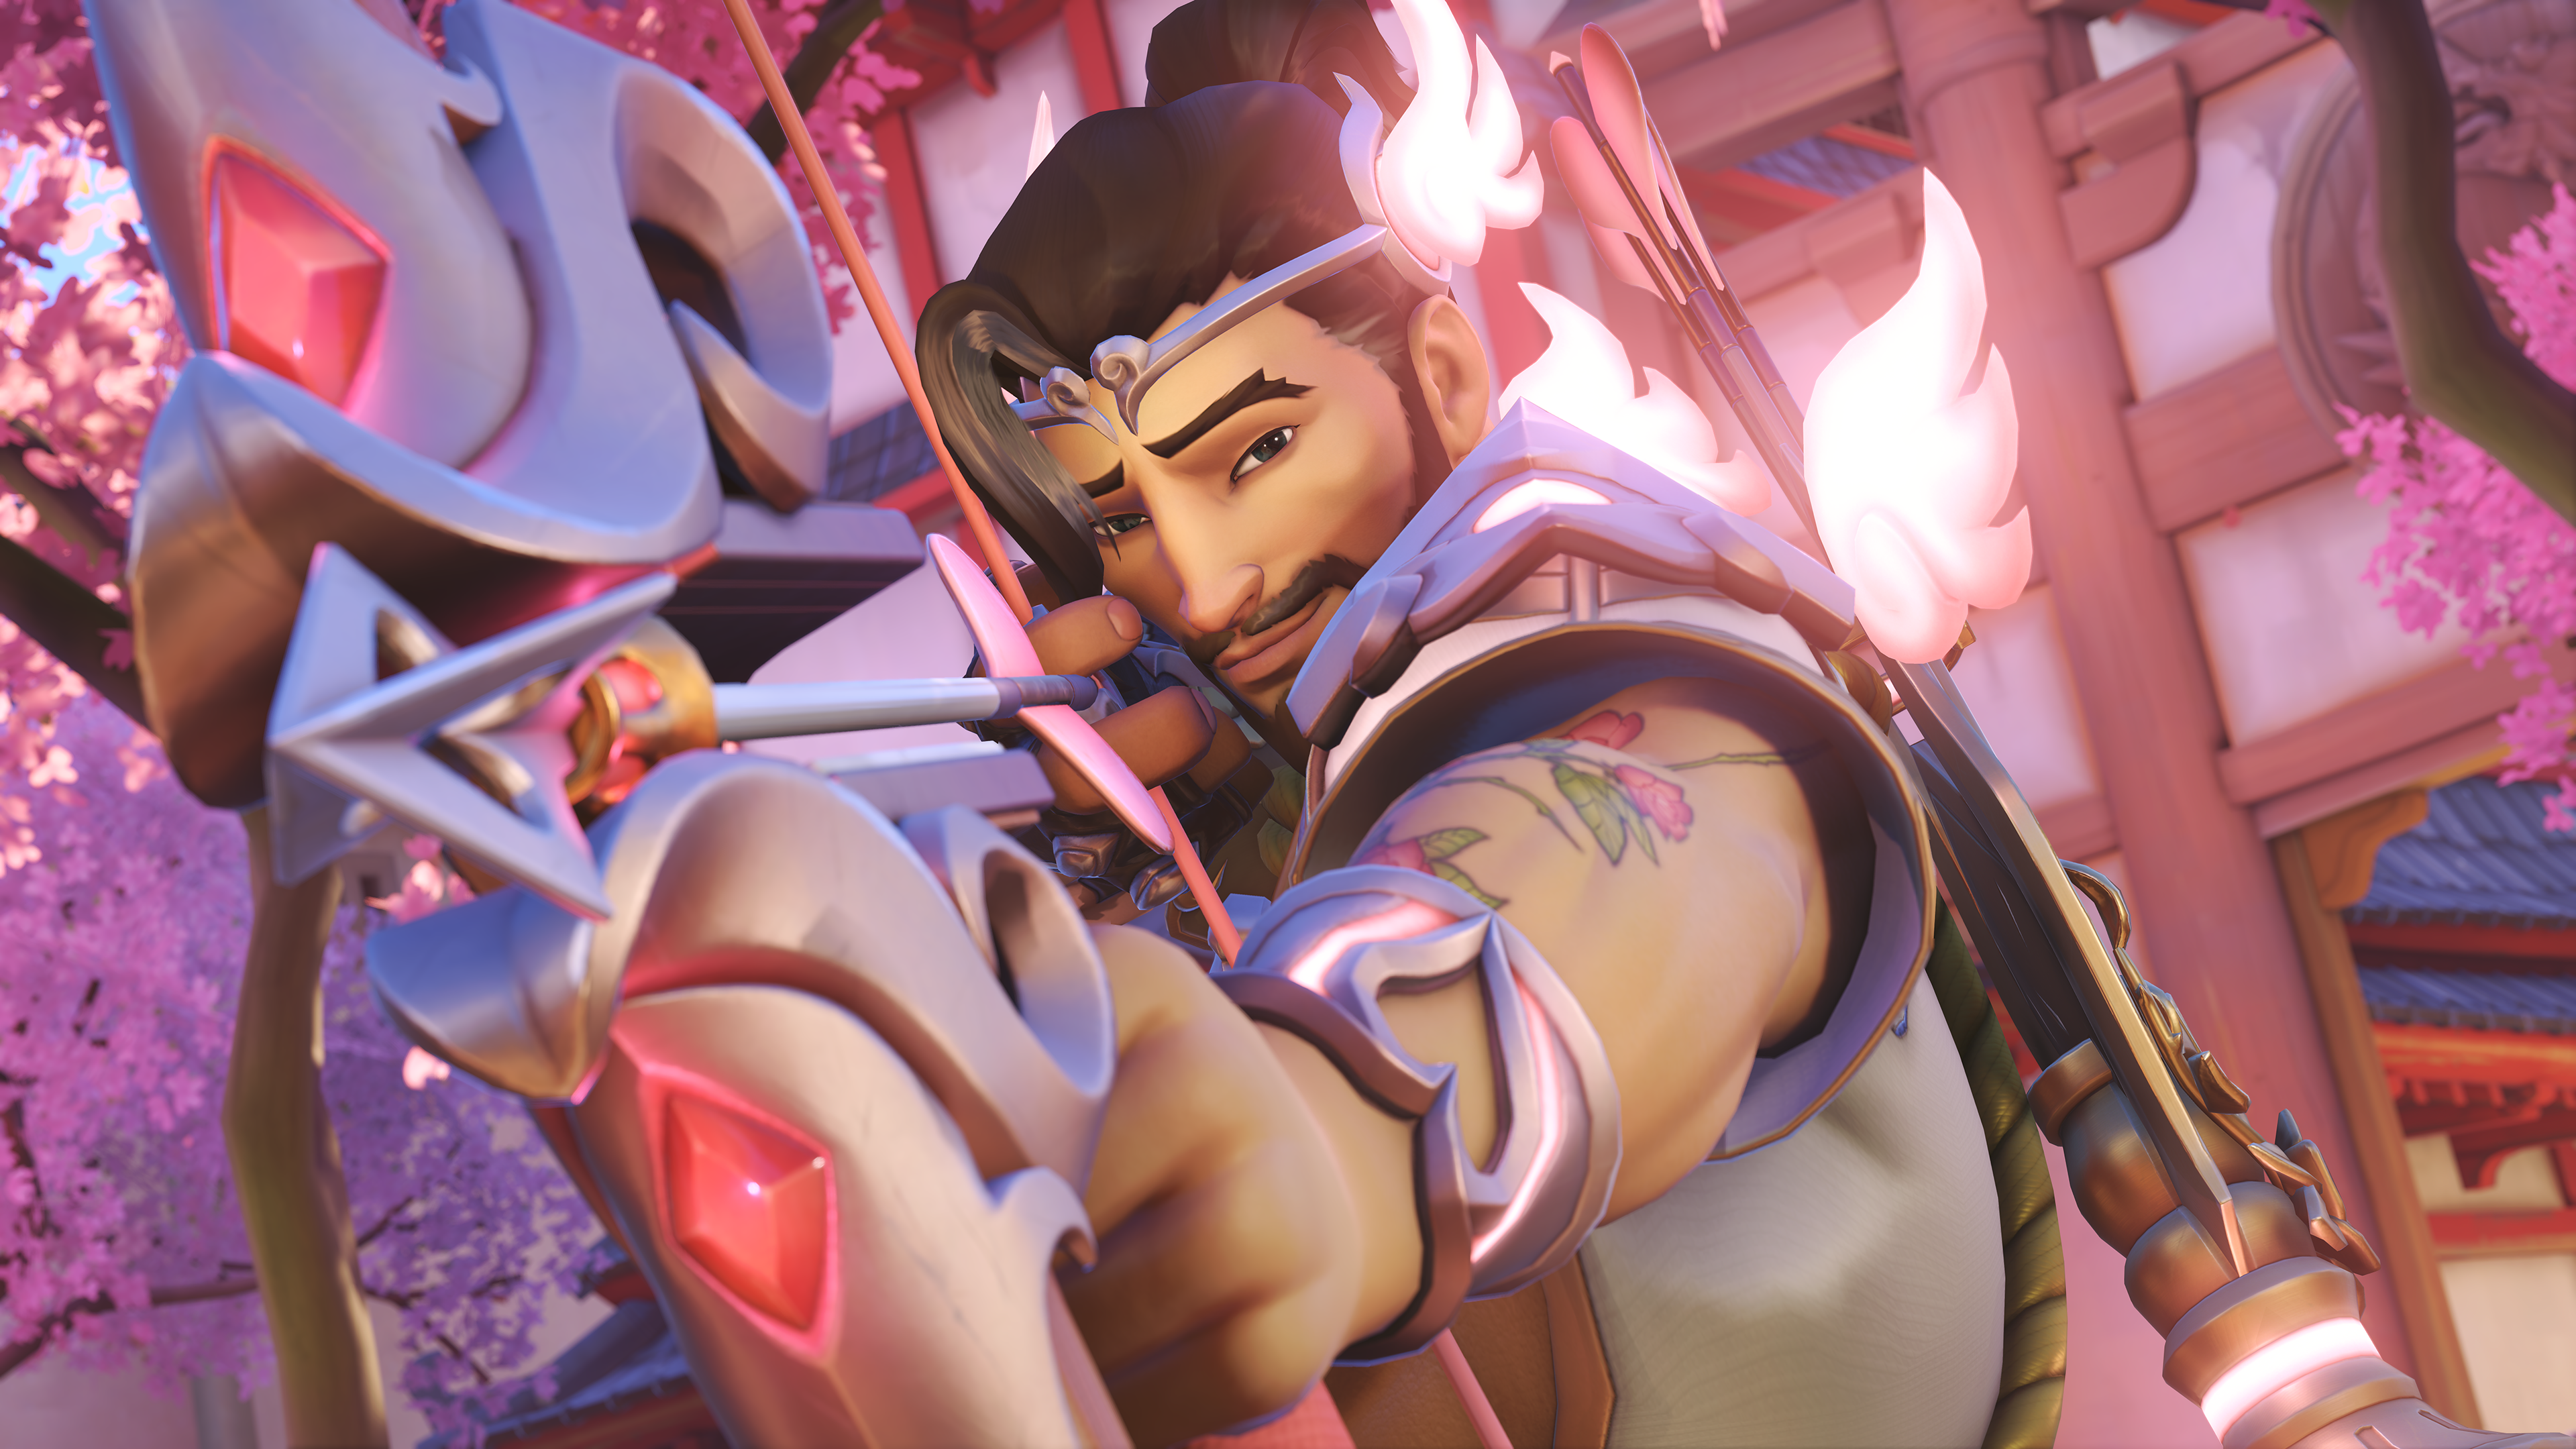 Uskyld diskret Udholdenhed How much rizz does your Overwatch 2 main have? Rating heroes based on new  Valentine's Day voice lines - Dot Esports